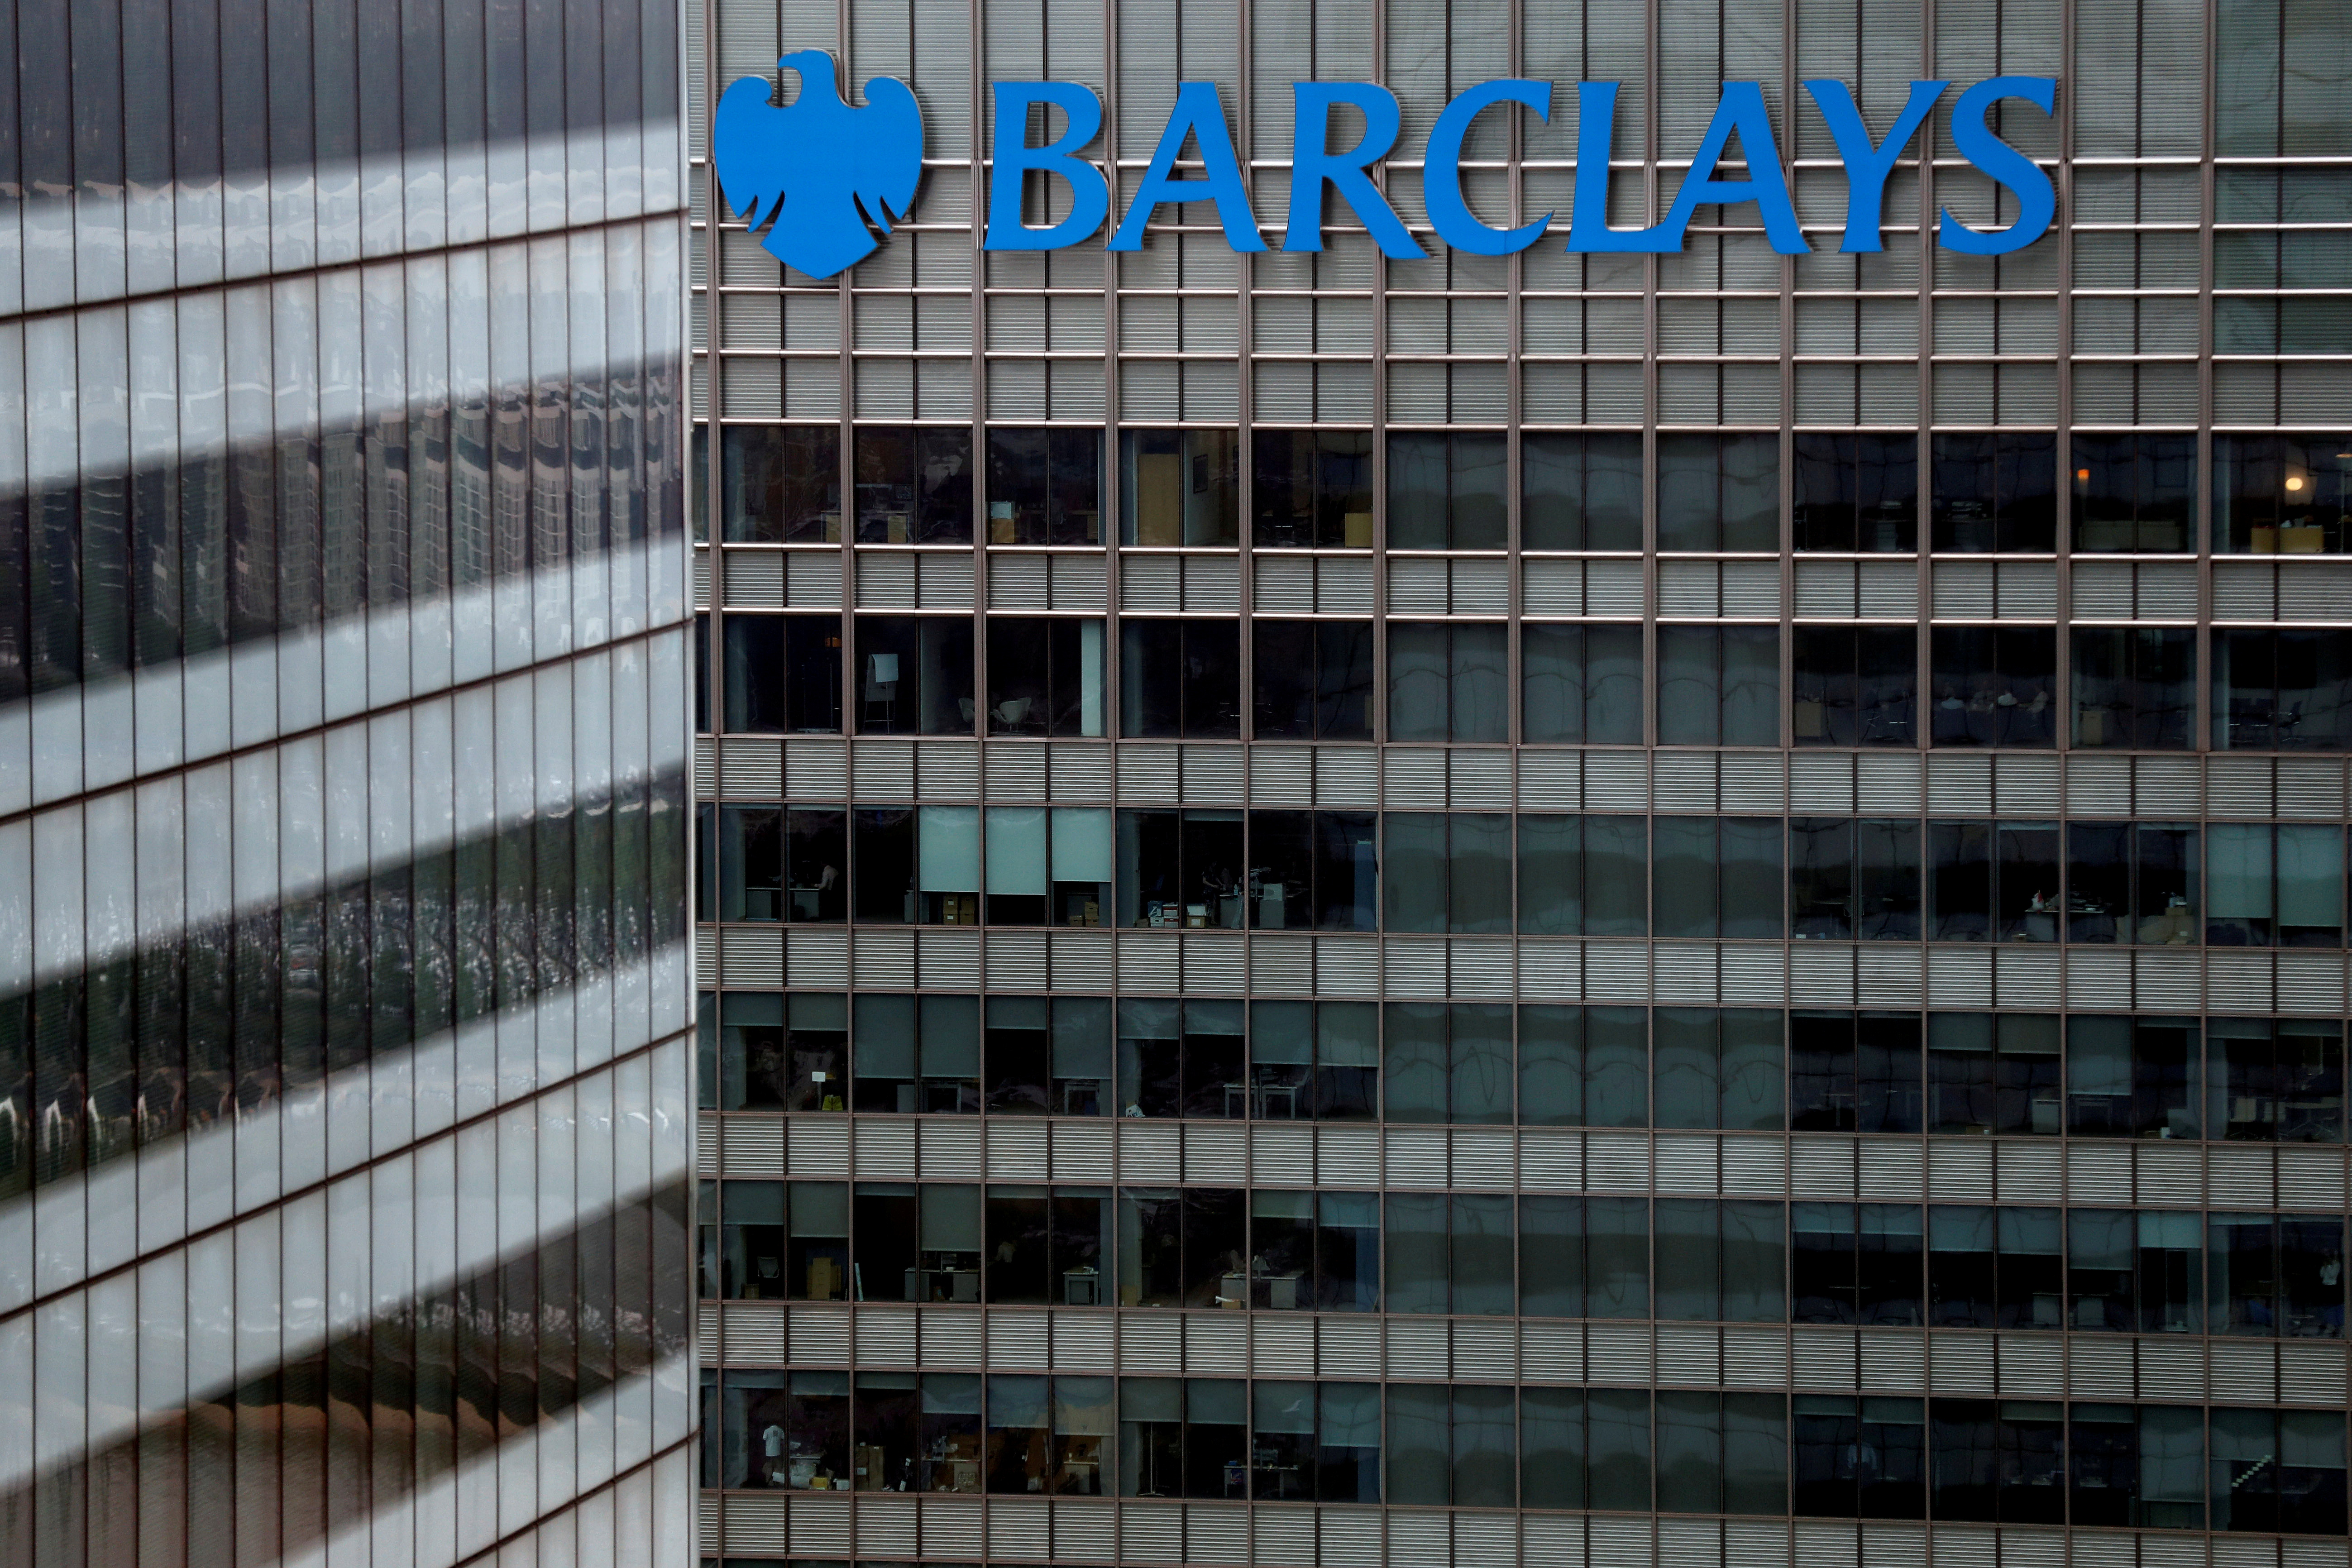 A Barclays bank building is seen at Canary Wharf in London, Britain May 17, 2017. REUTERS/Stefan Wermuth//File Photo